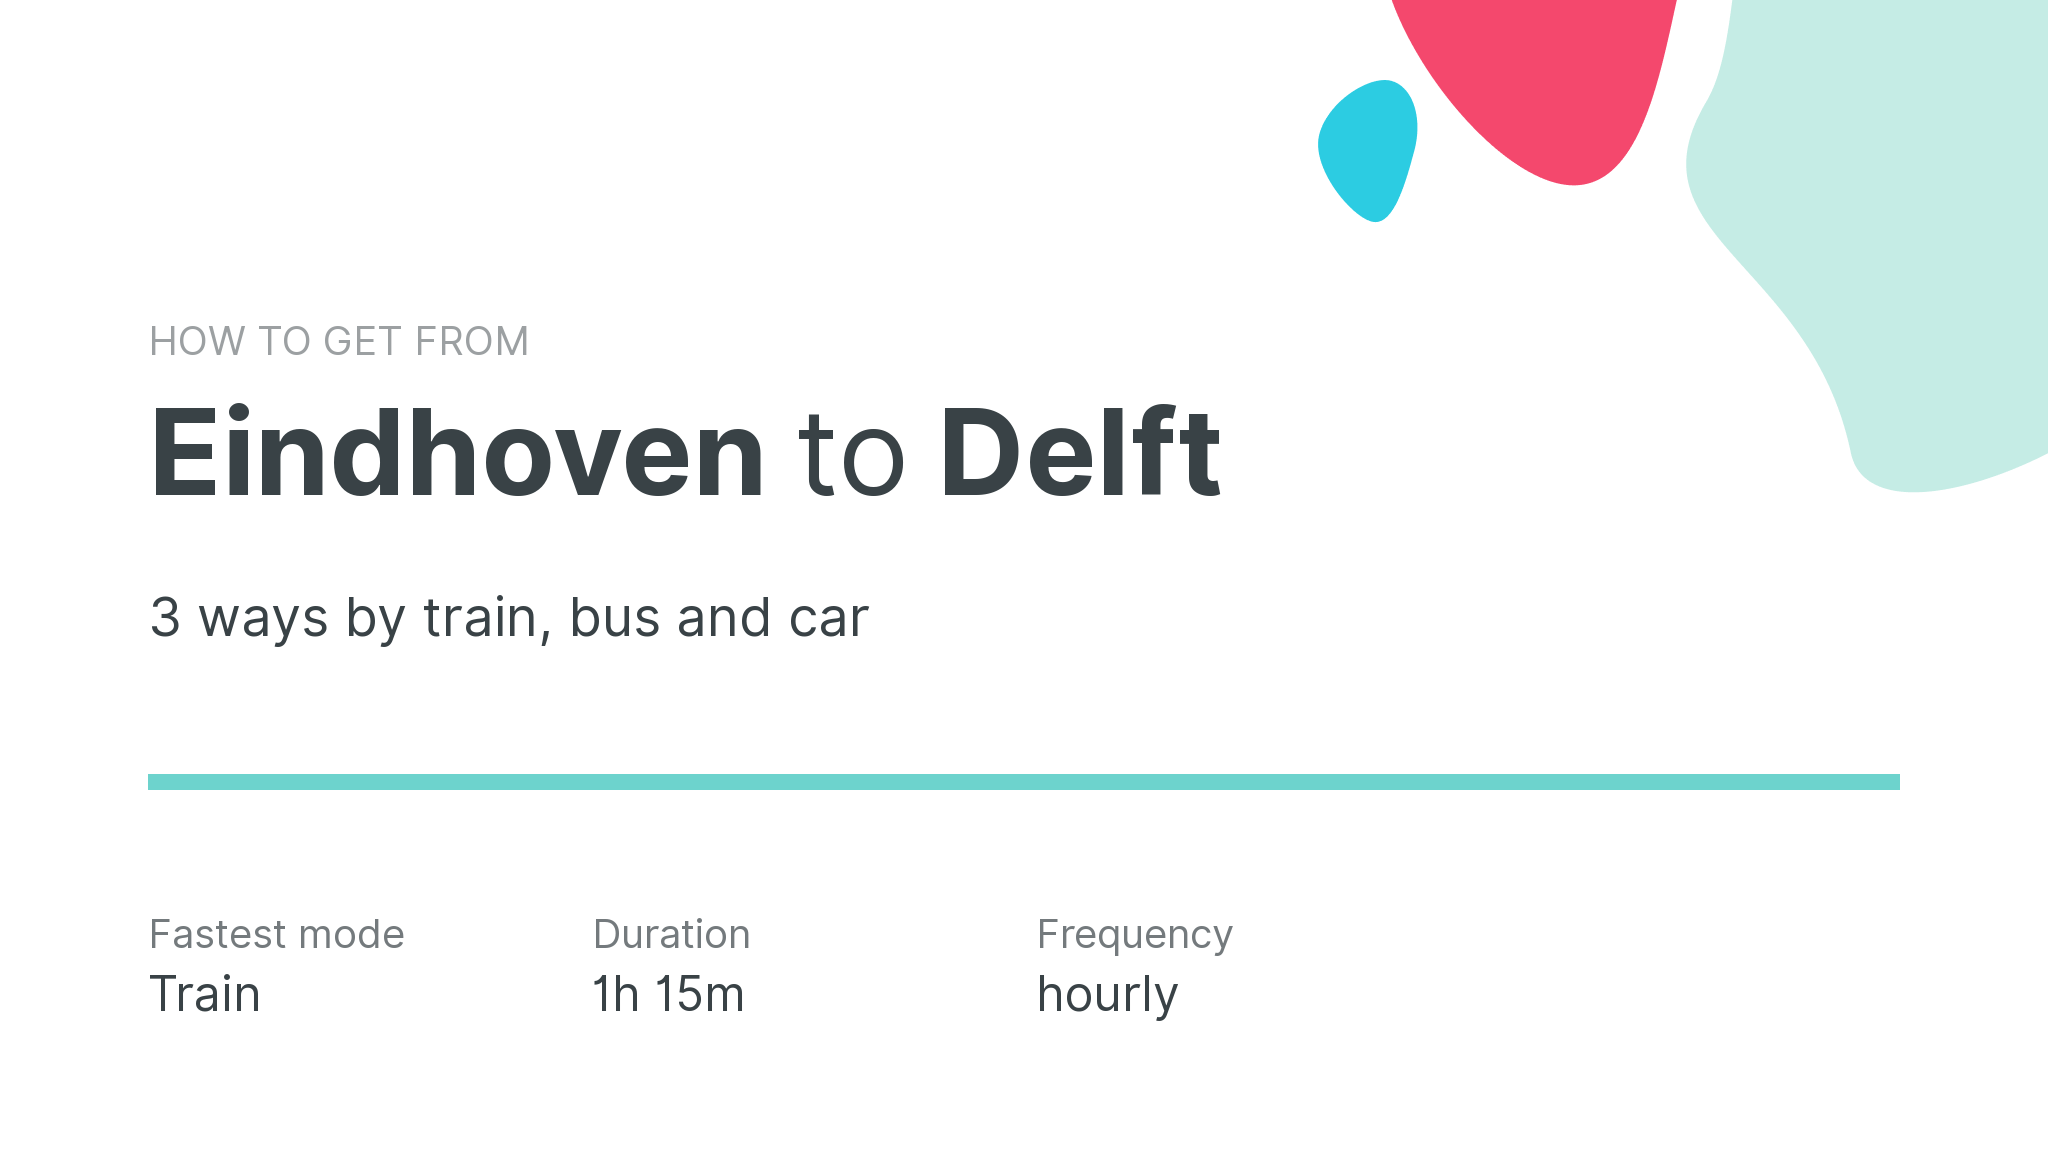 How do I get from Eindhoven to Delft